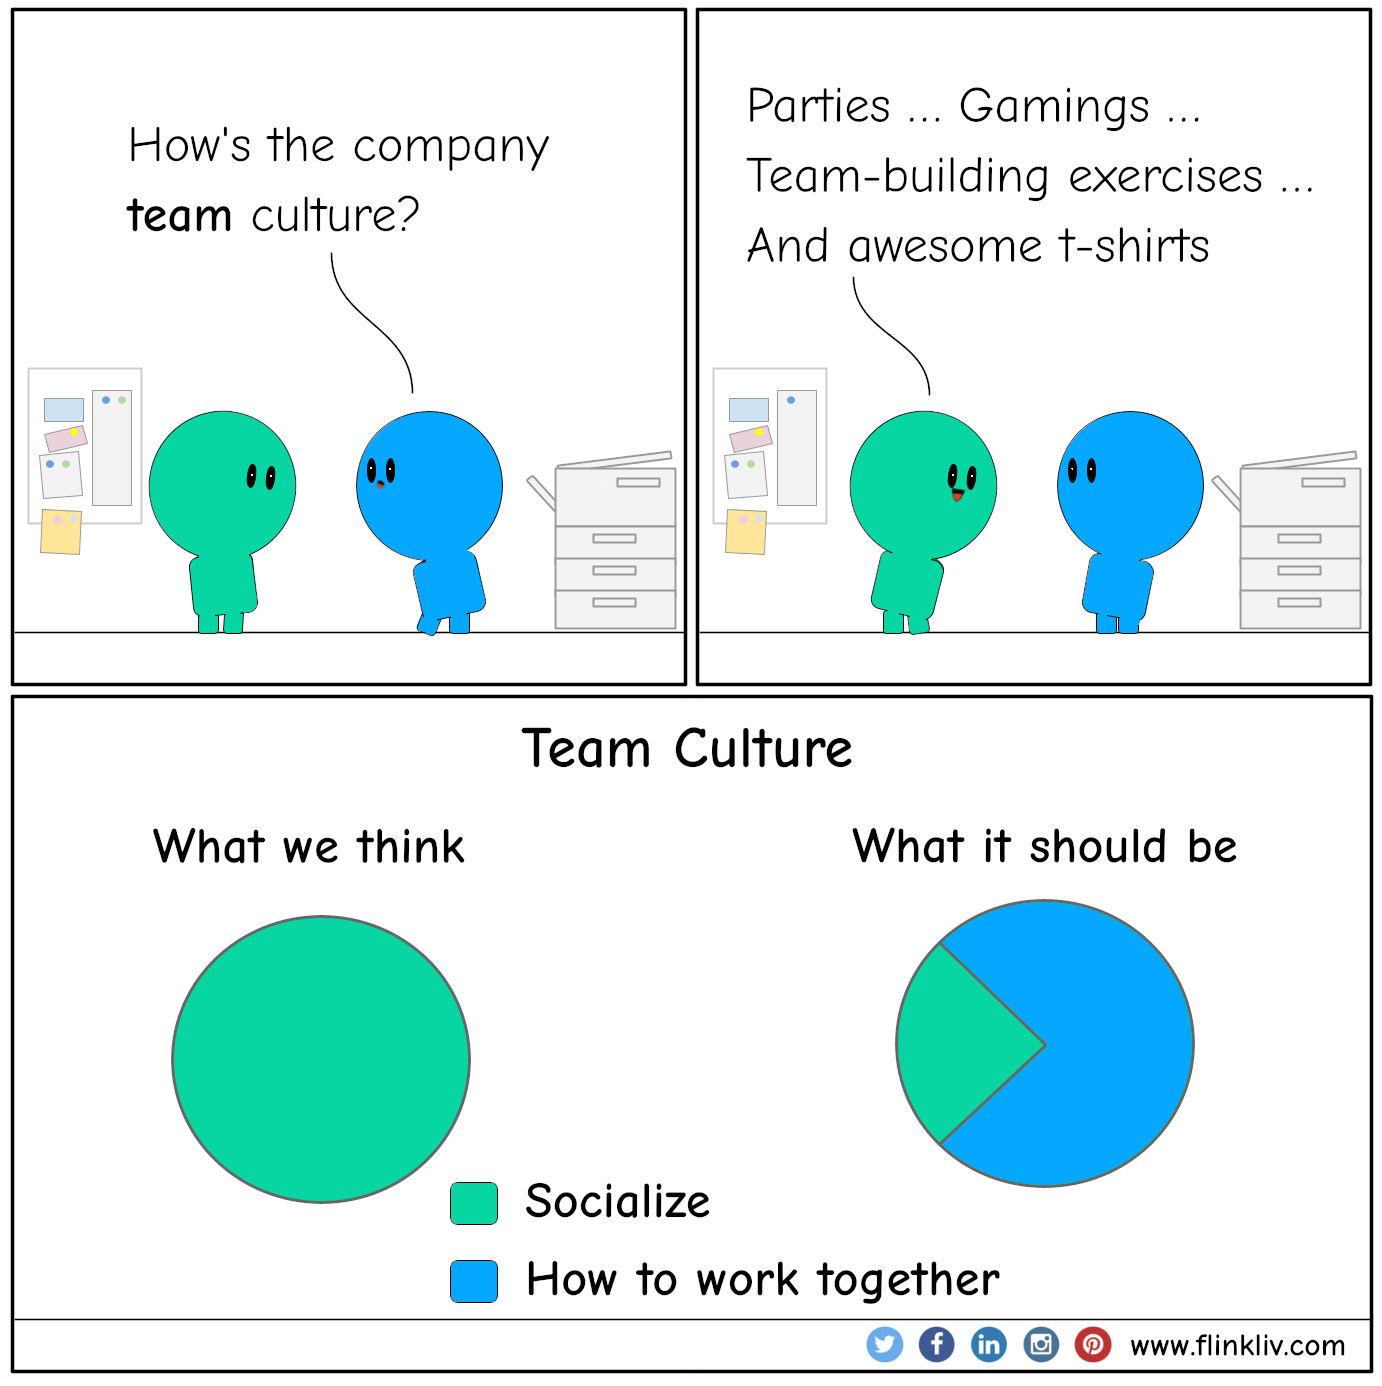 Conversation between A and B about company culture A: How's the company team culture? B: Oh boy: parties, gamings, team-building exercises, and awesomeness t-shirts By flinkliv.com